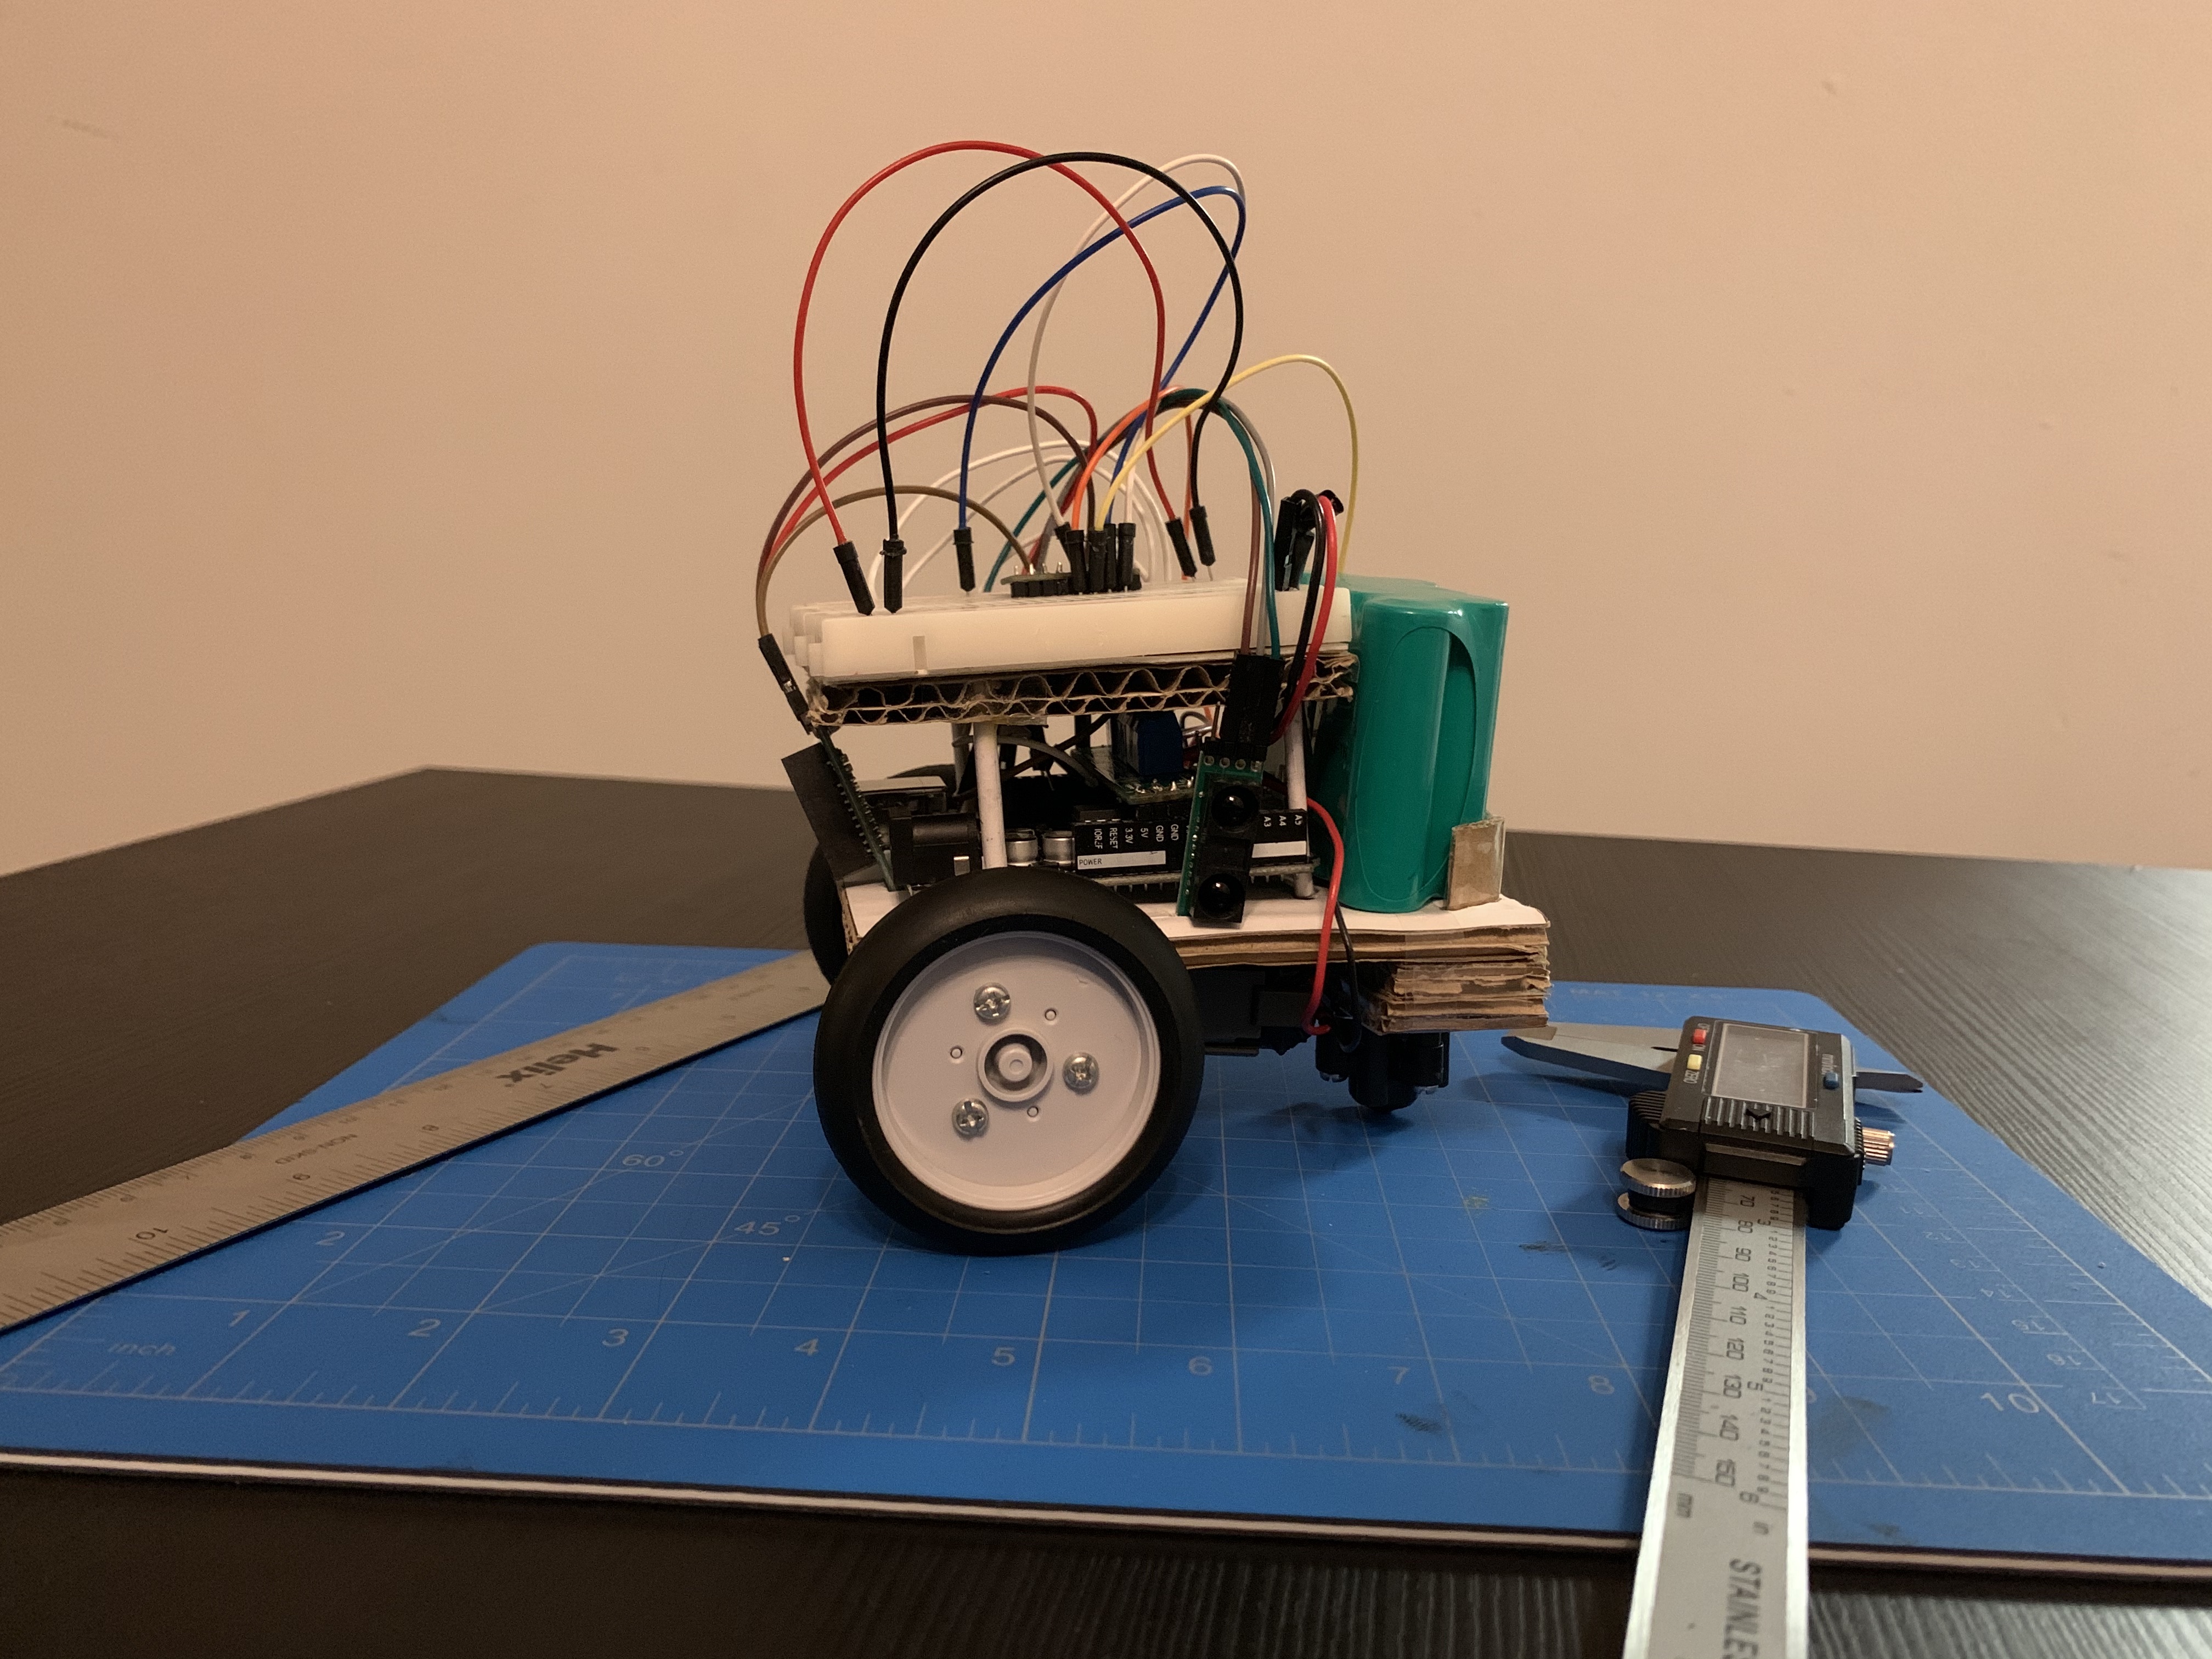 Preparing to 3D print a prototyped chassis